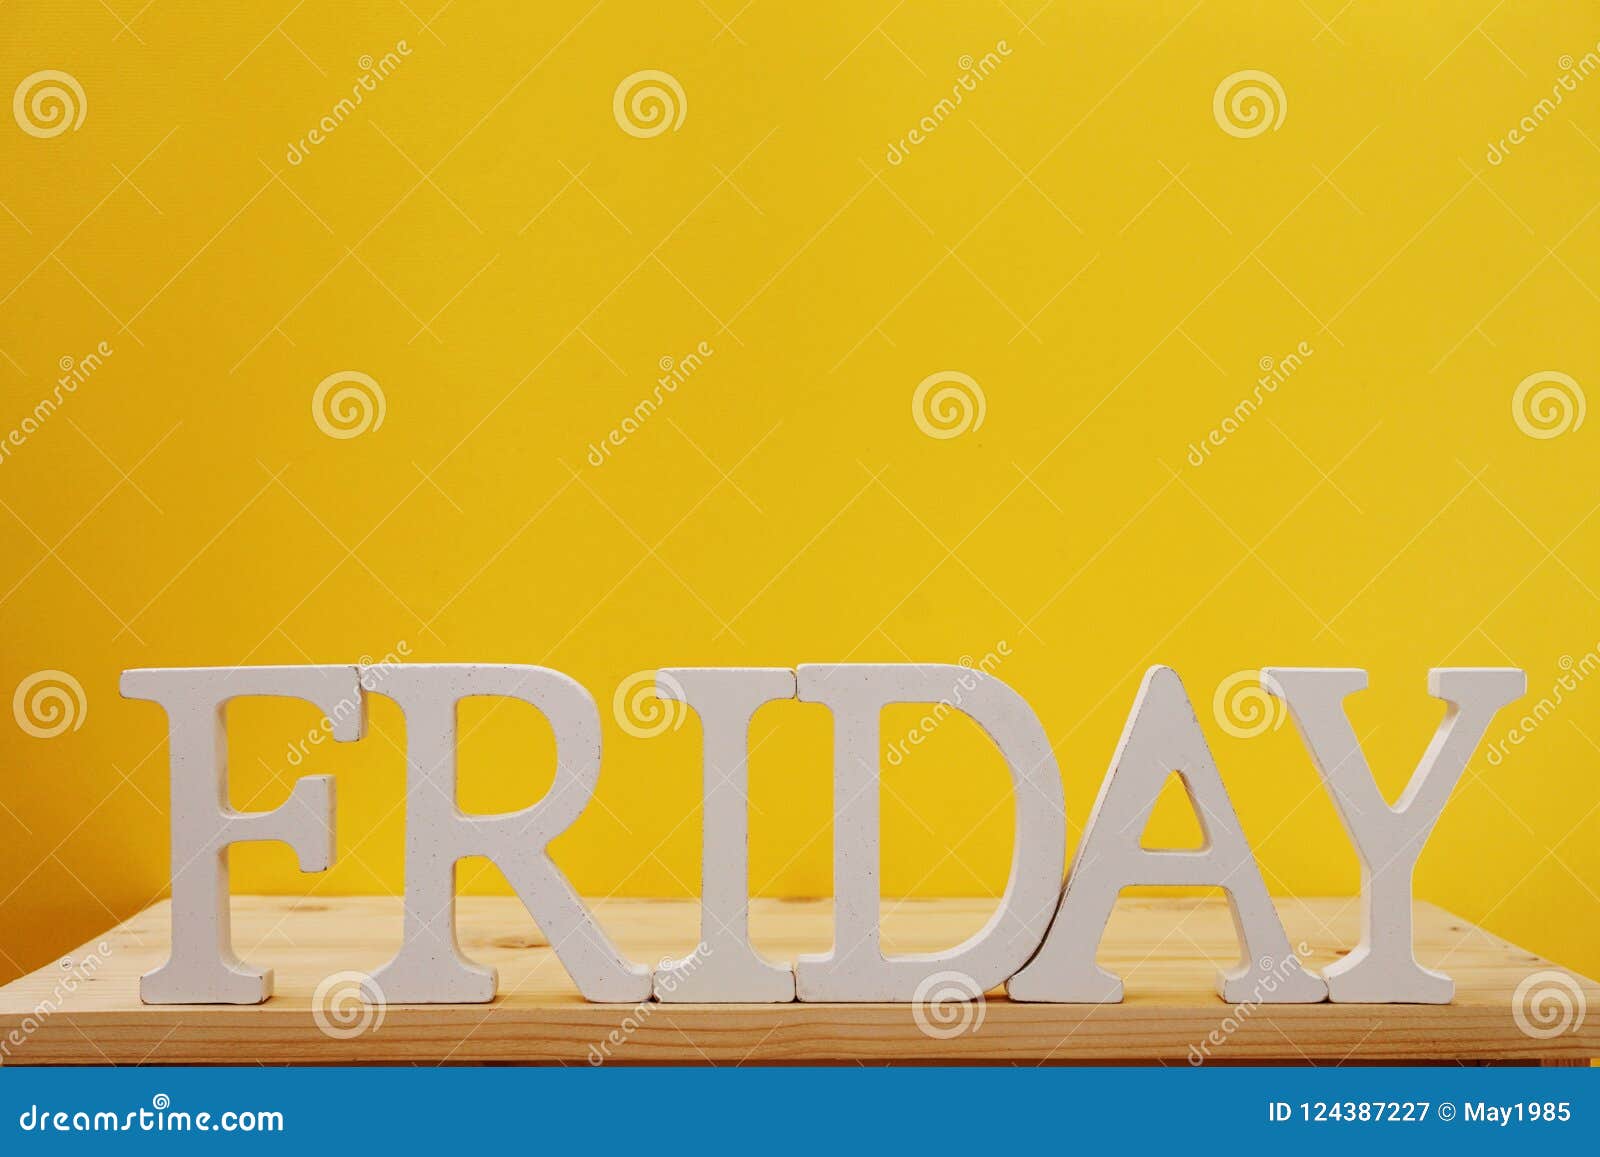 Friday Word Decorative Letters on Wooden Background Stock Image - Image ...